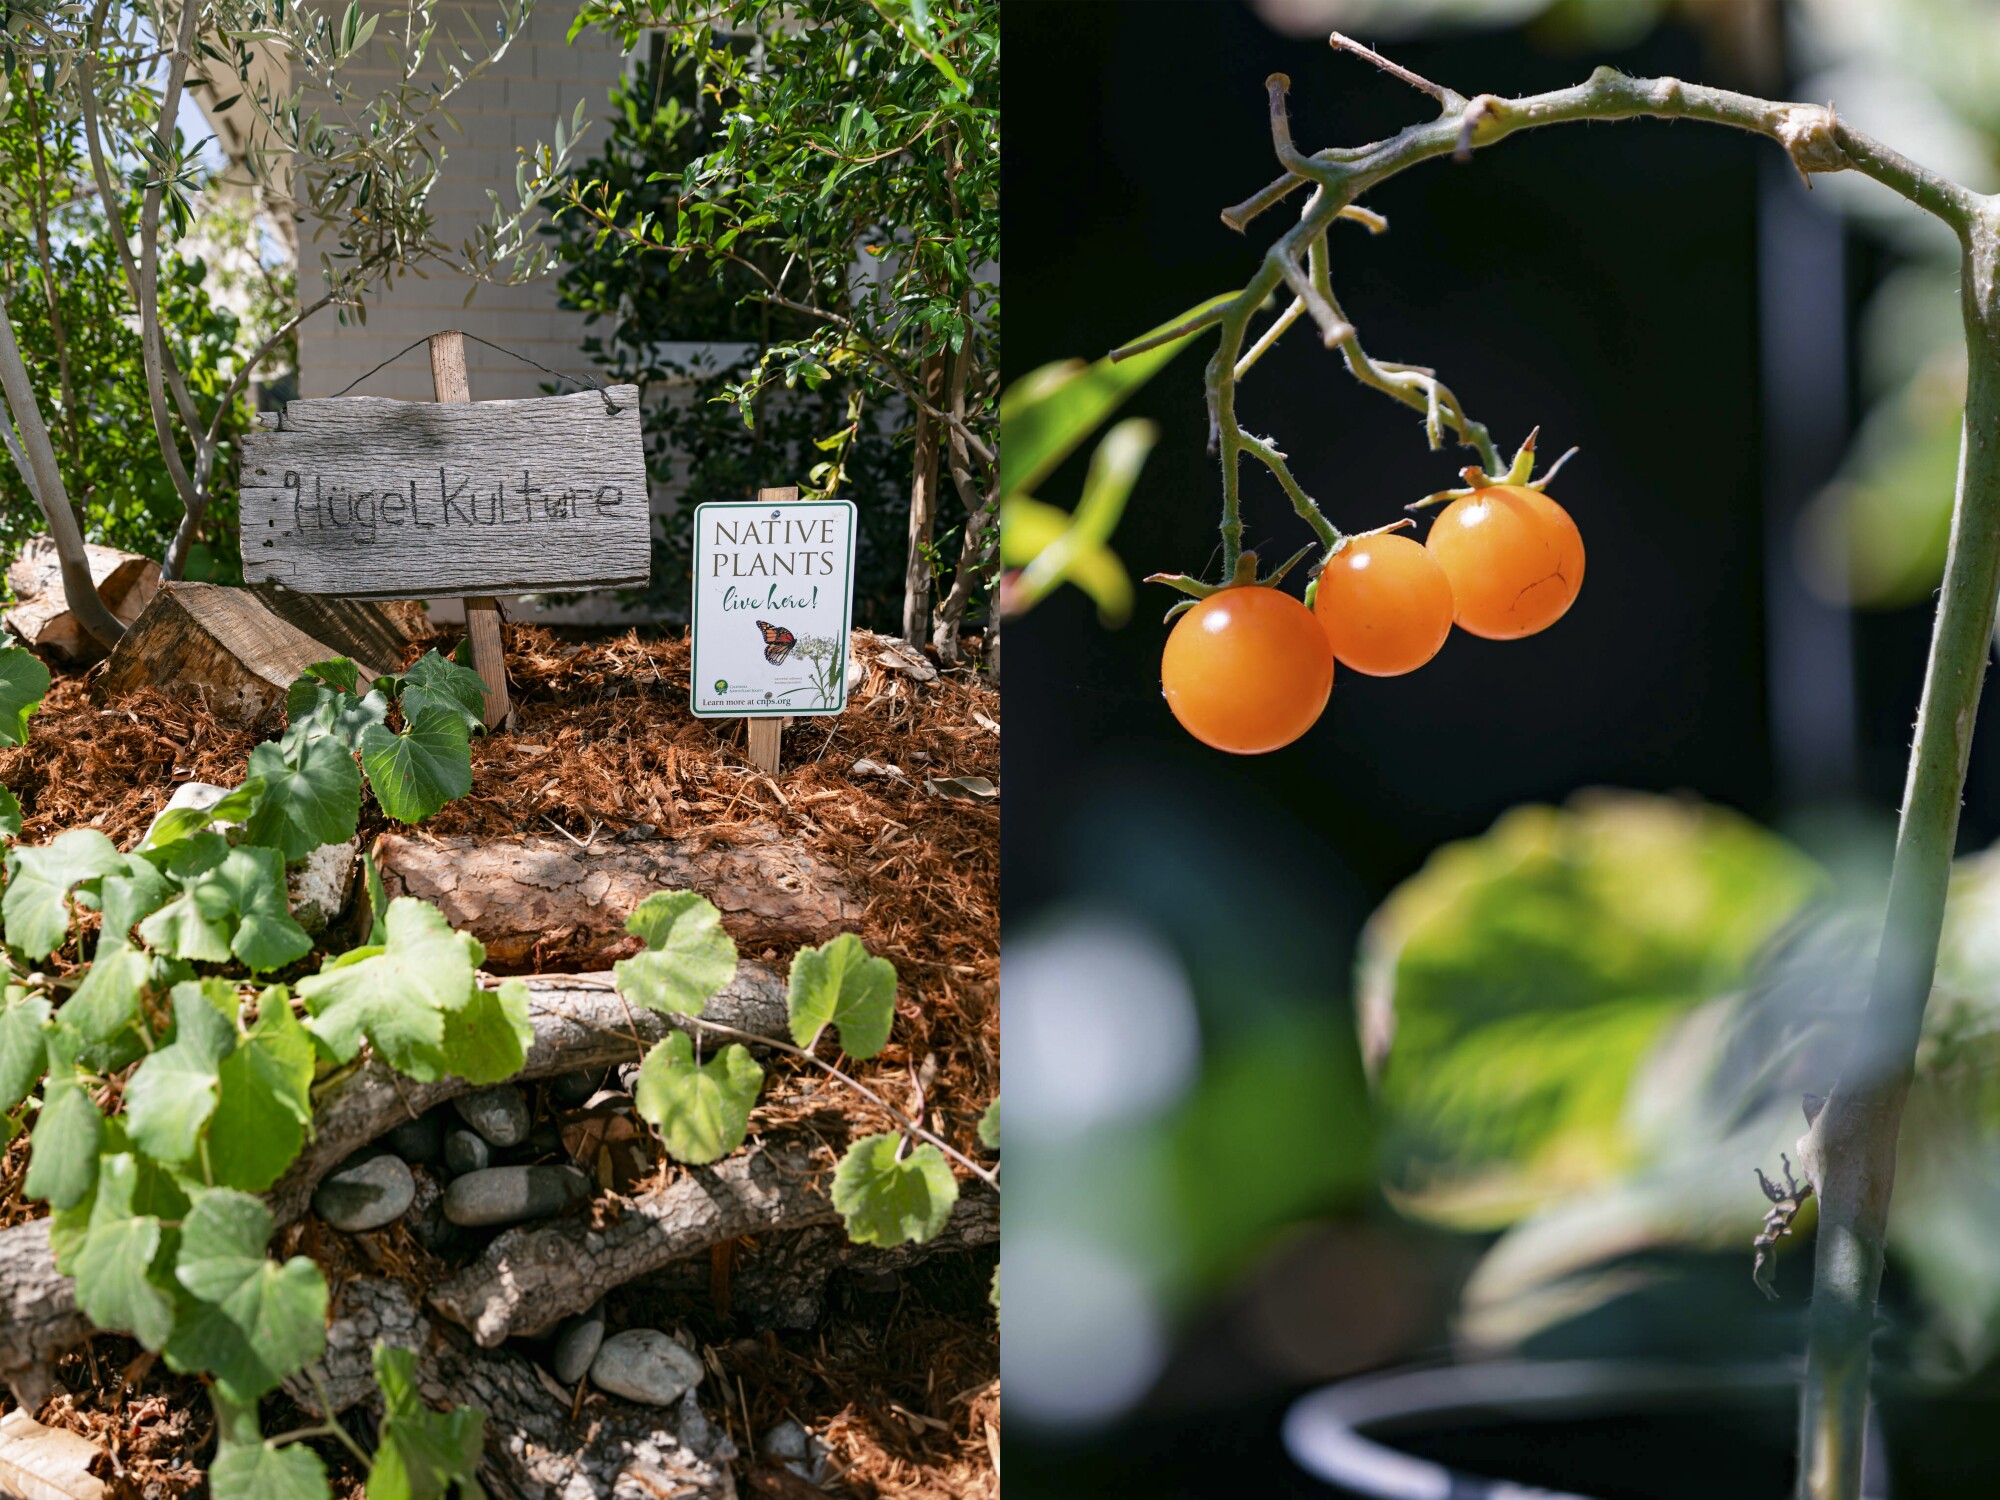 Left: A grape plant and two signs in the dirt. Right: Yellow cherry tomatoes up close